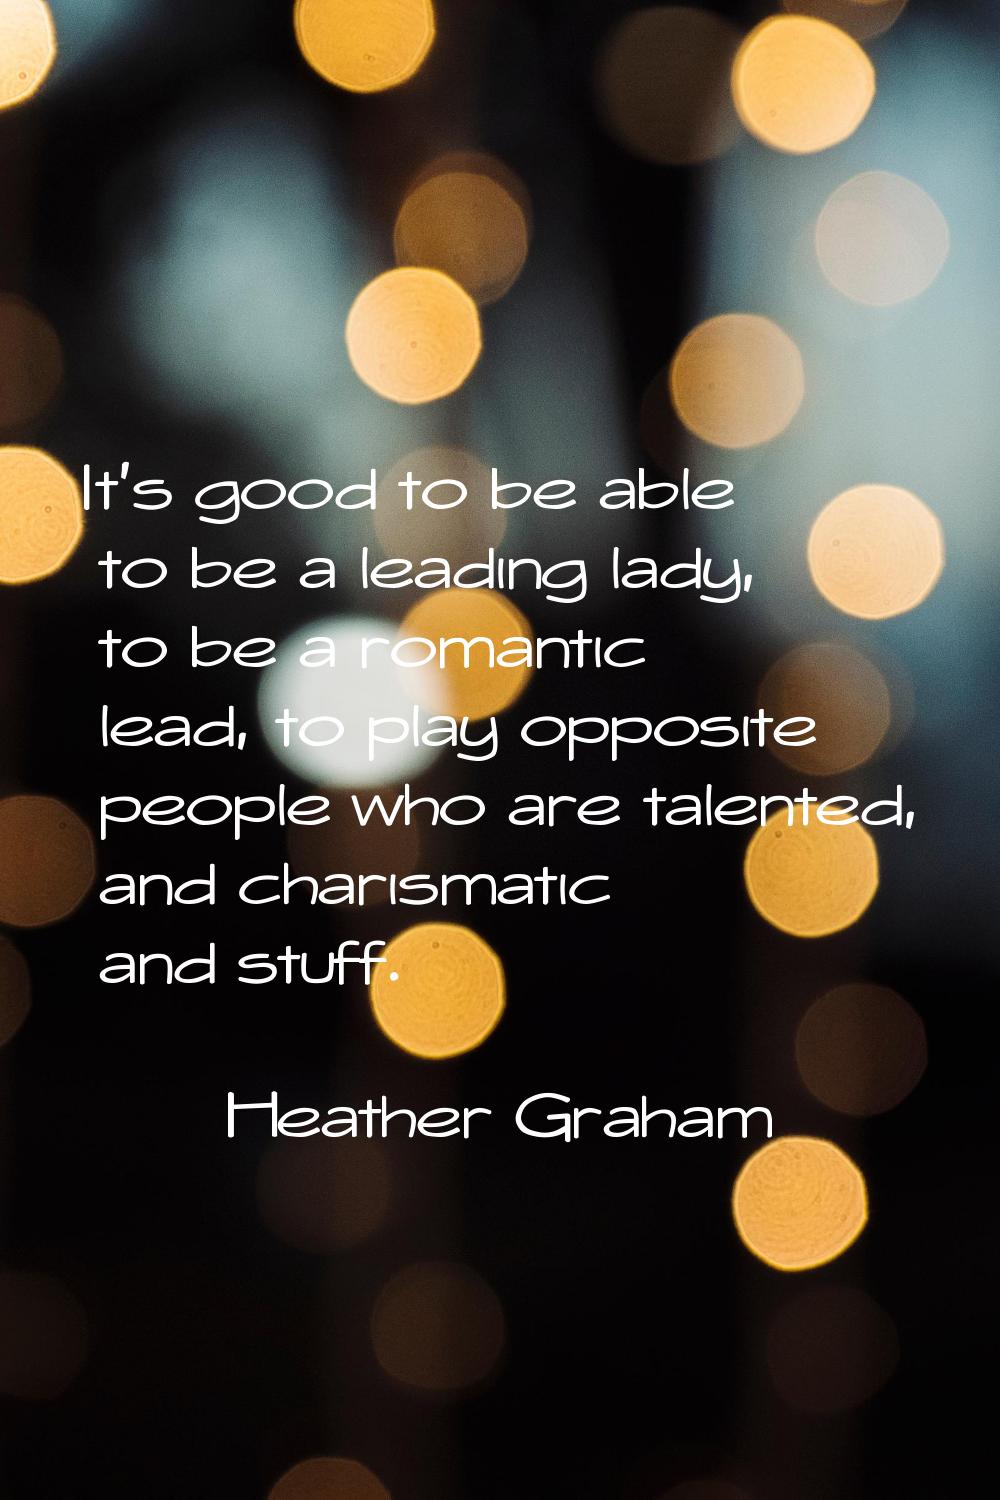 It's good to be able to be a leading lady, to be a romantic lead, to play opposite people who are t